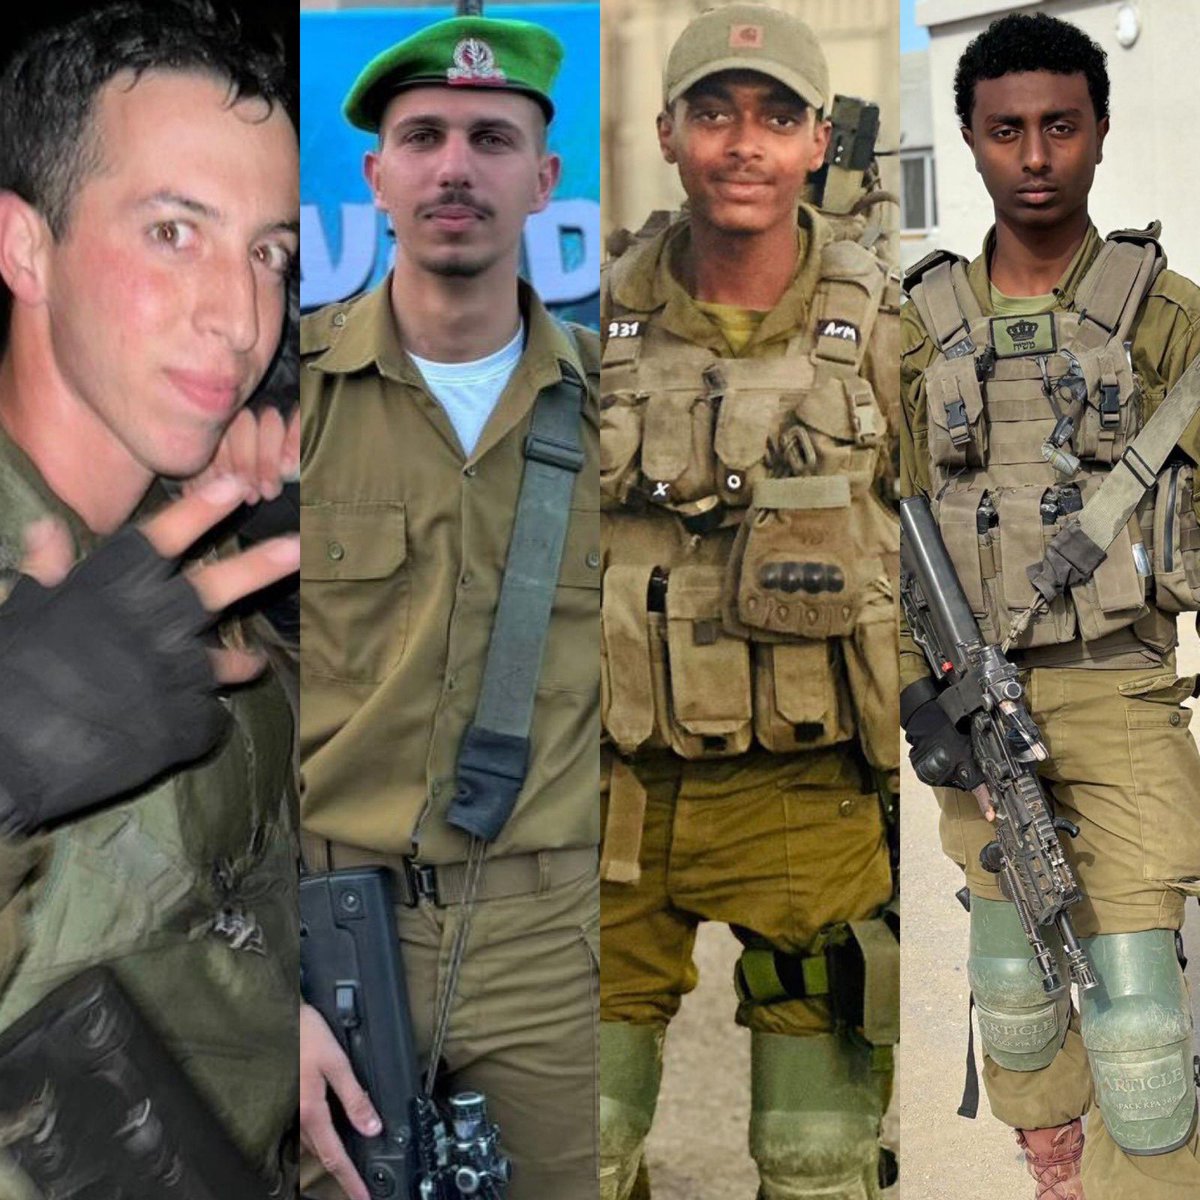 *HYD:* The IDF has cleared for publication the names of four soldiers from the 931st battalion killed in action by an IED in northern Gaza.

Itay Livny, 19
Yosef Dassa, 19
Ermiyas Mekuriyaw, 19
Daniel Levy, 19

They died fighting to destroy the terrorist organization Hamas in its